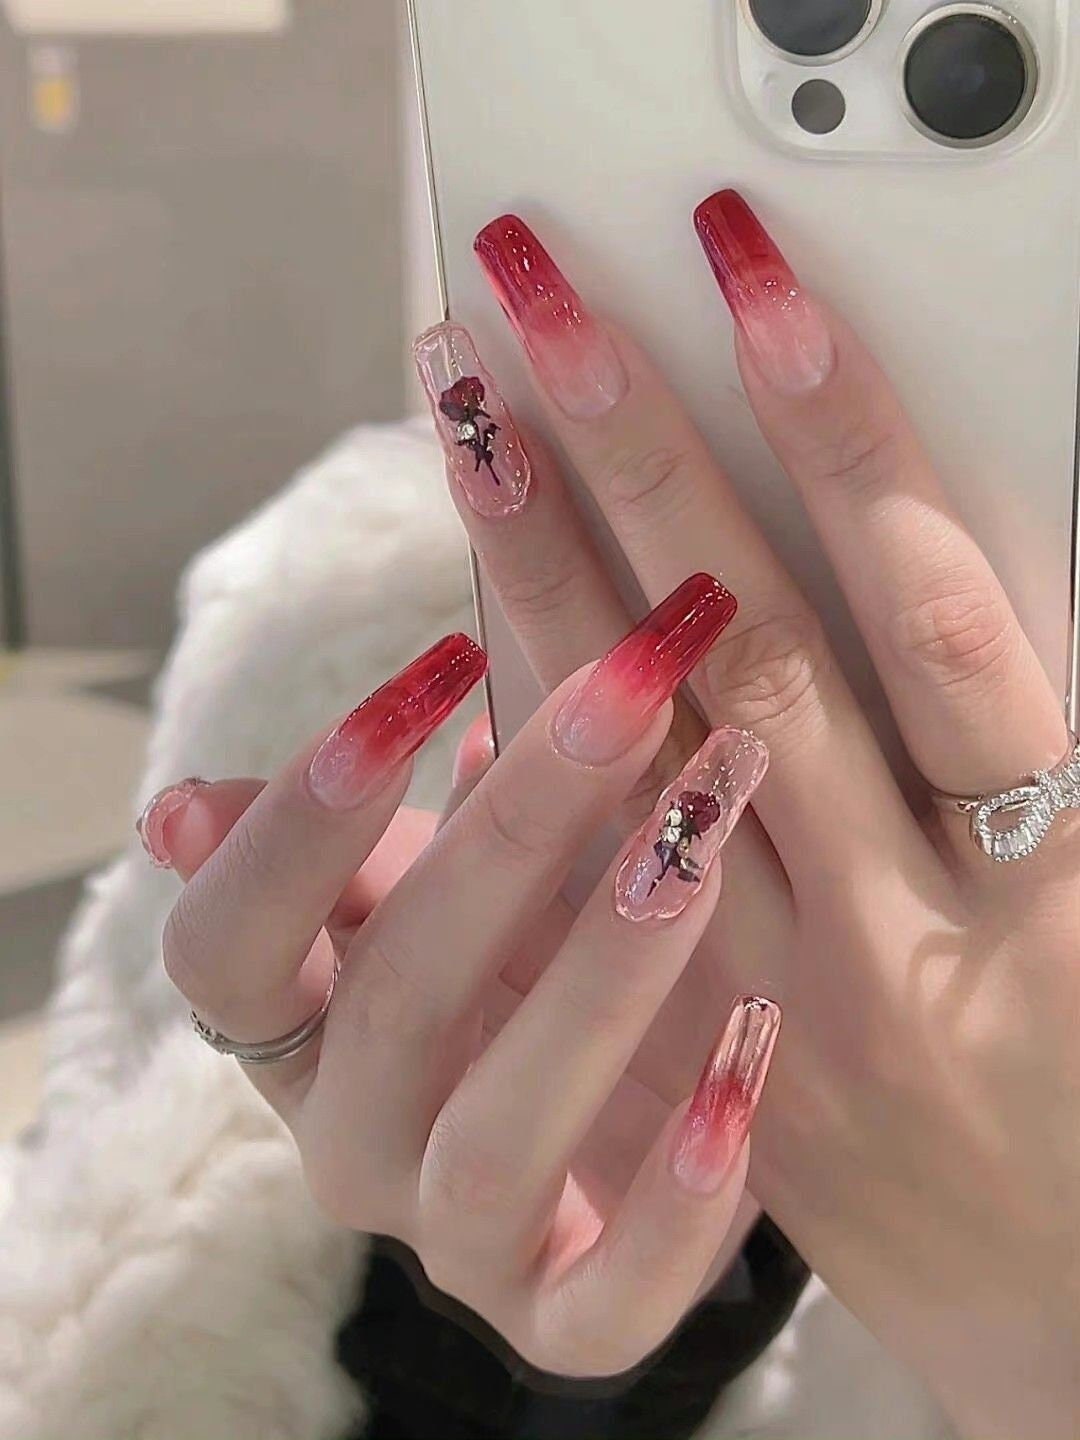 Rose jelly nails